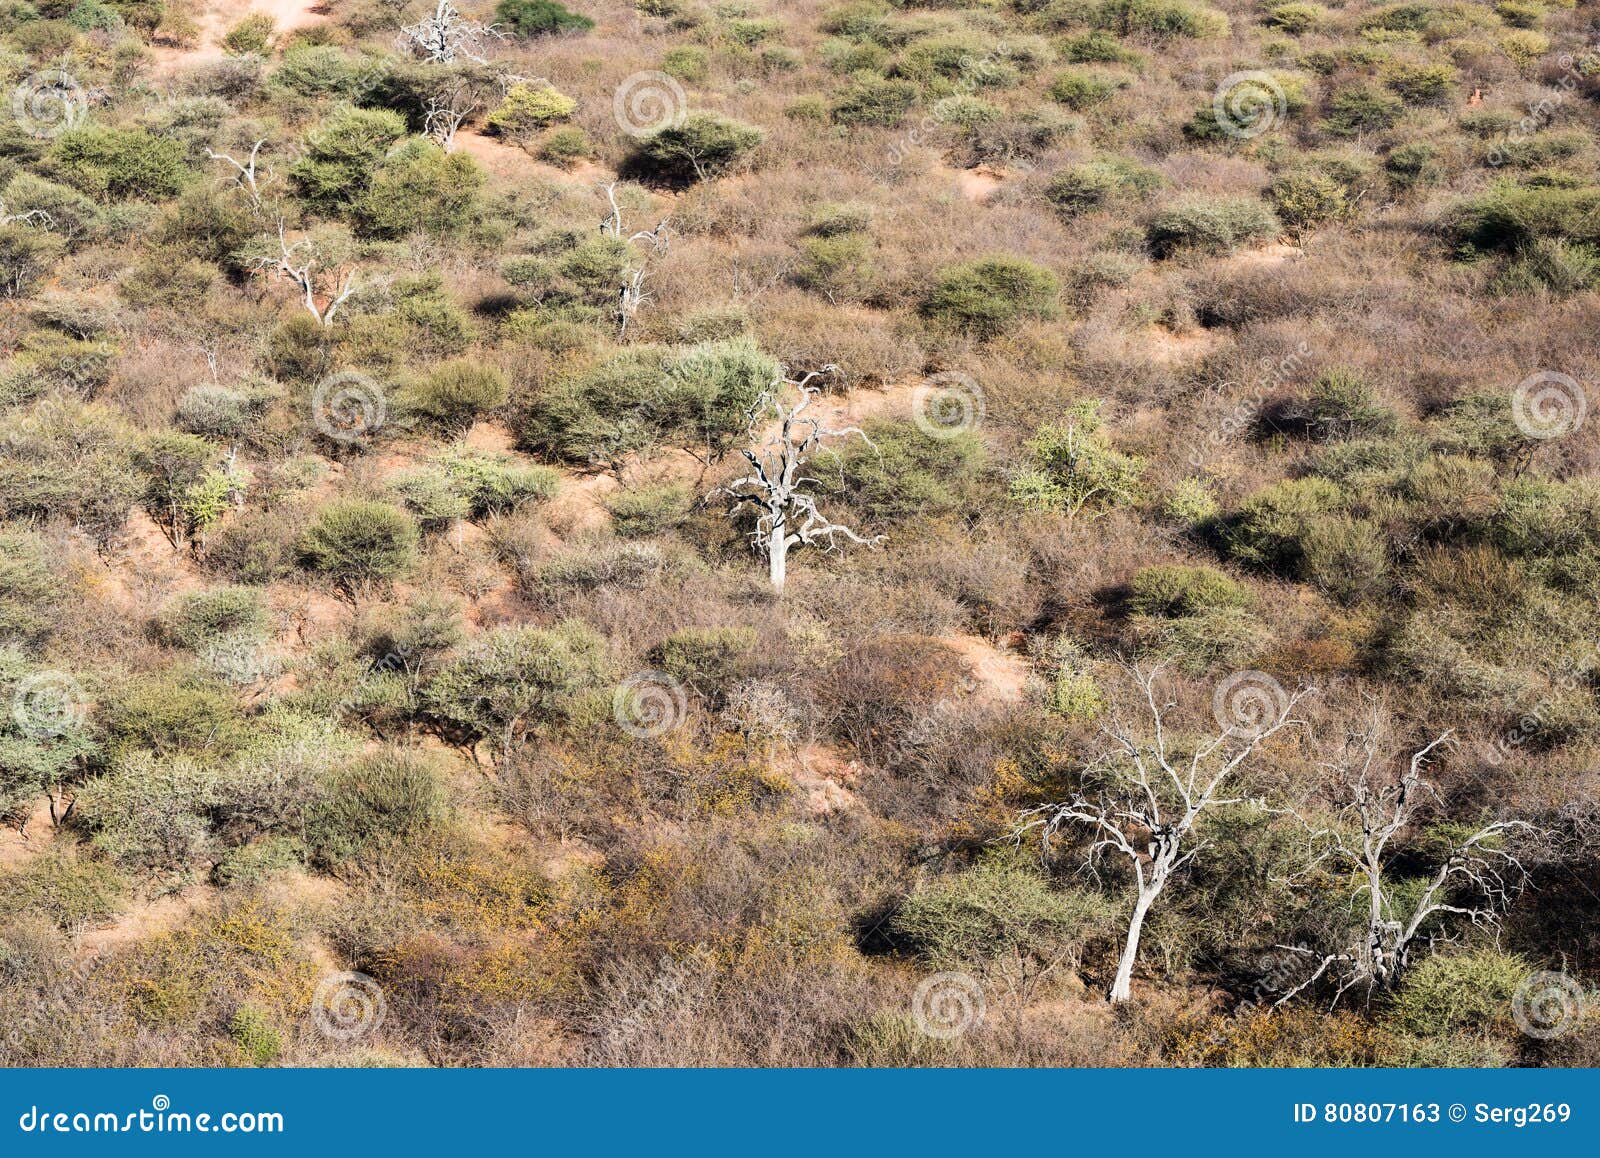 namibian savanna woodlands view from the top of waterberg plateau